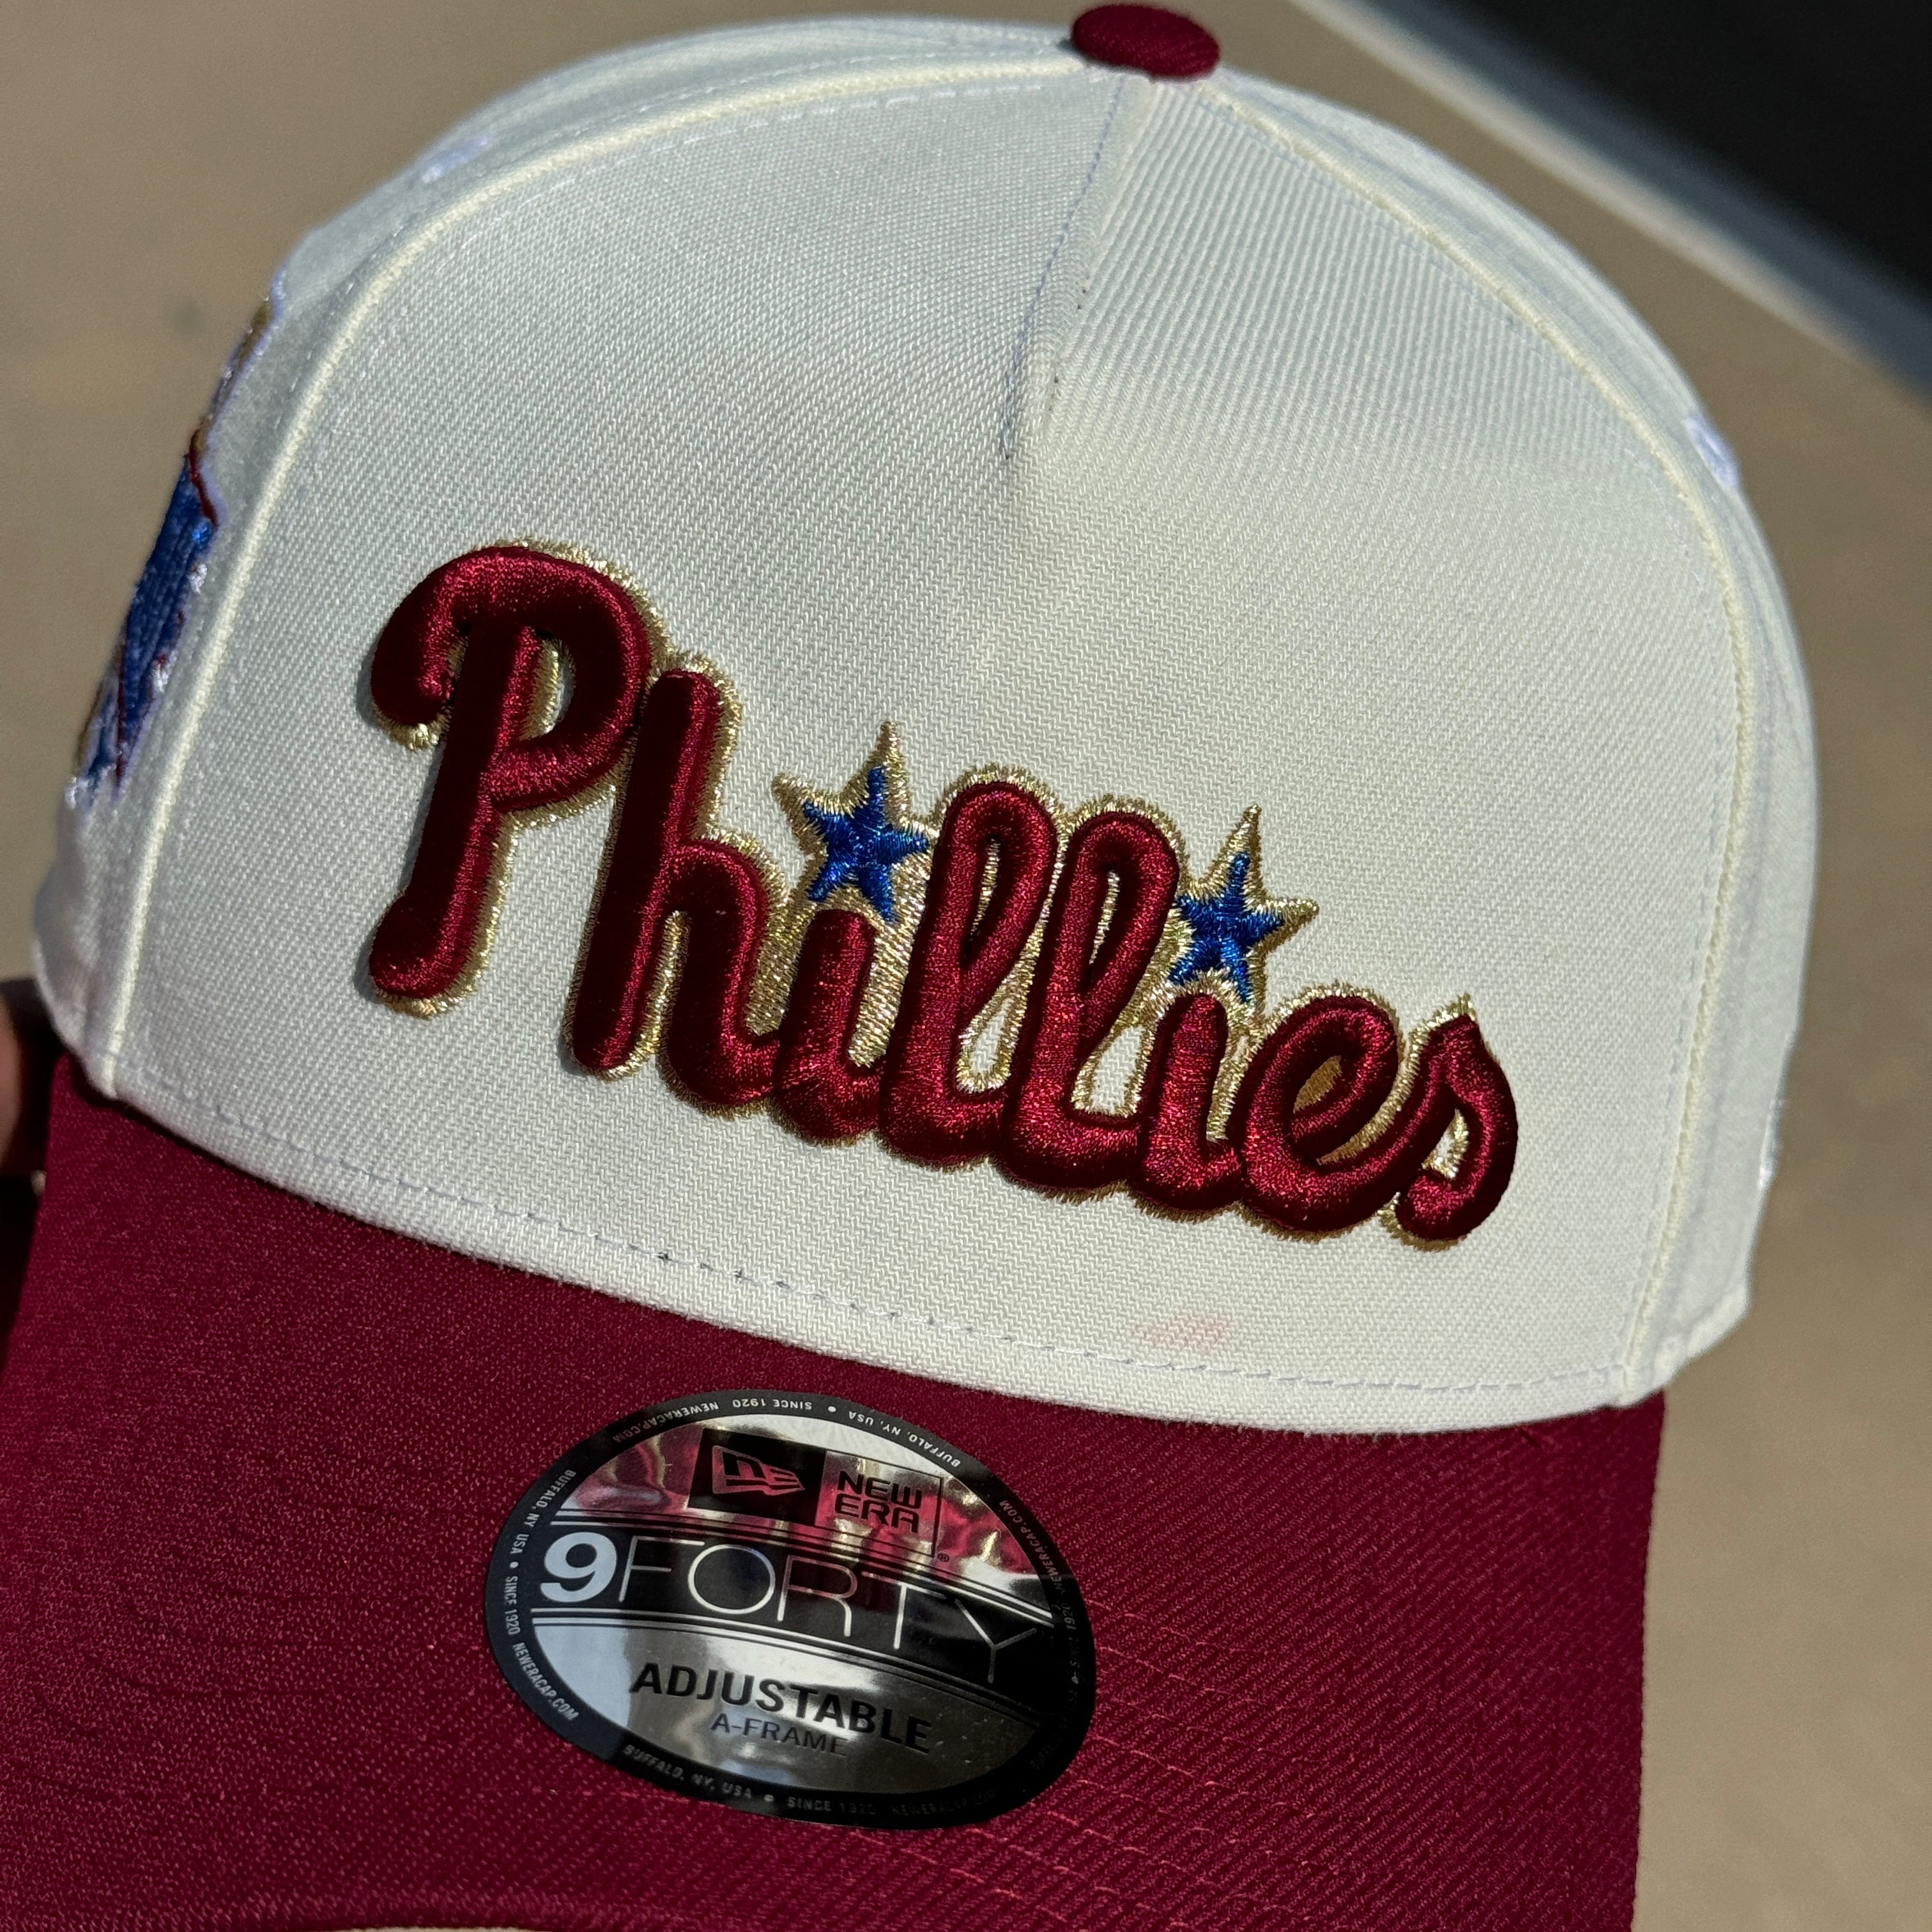 Chrome Red Philadelphia Phillies All Star Game New Era 9Forty Adjustable One Size A-Frame